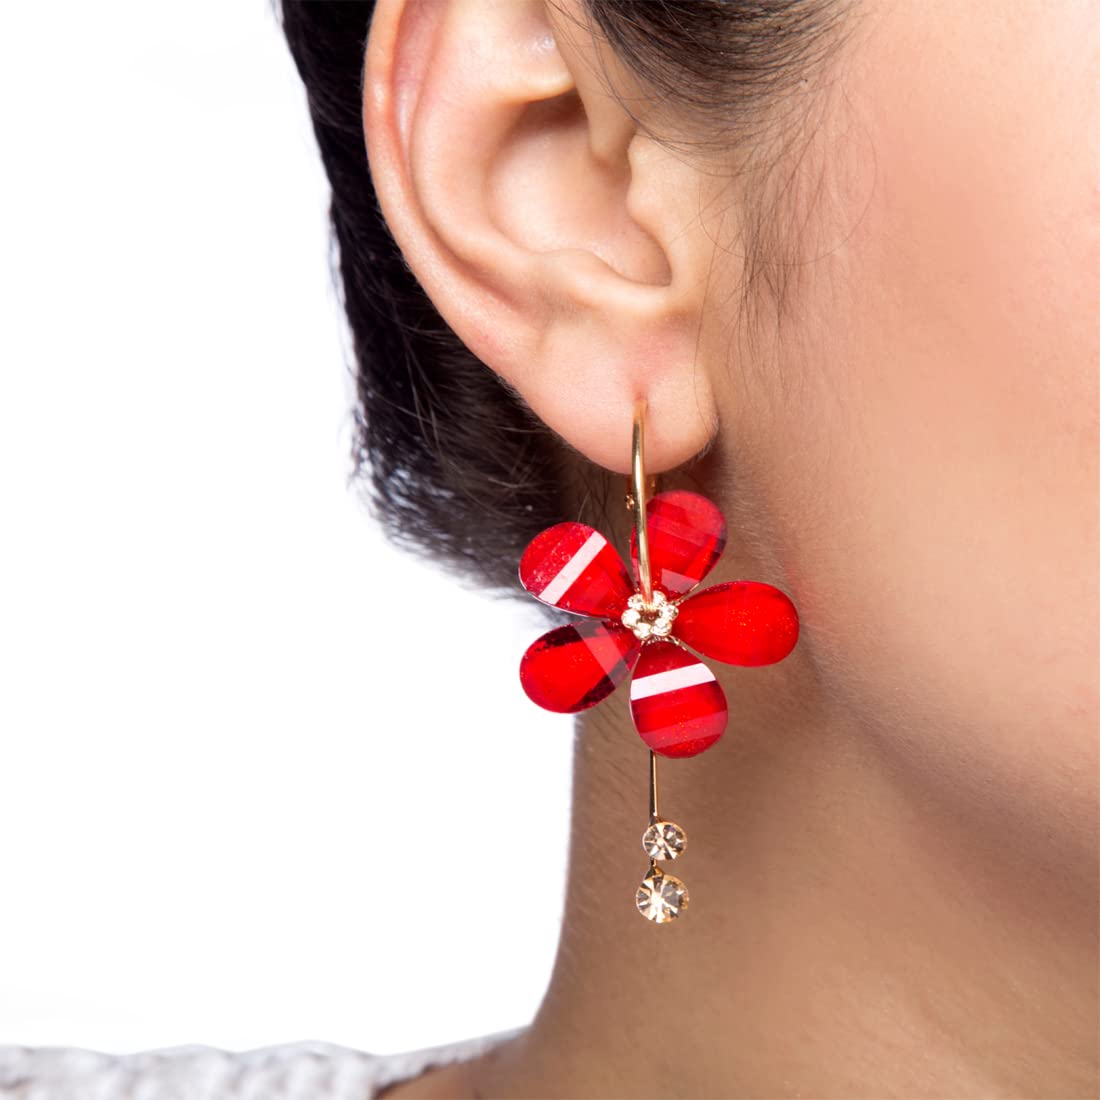 Discover more than 67 red western earrings super hot